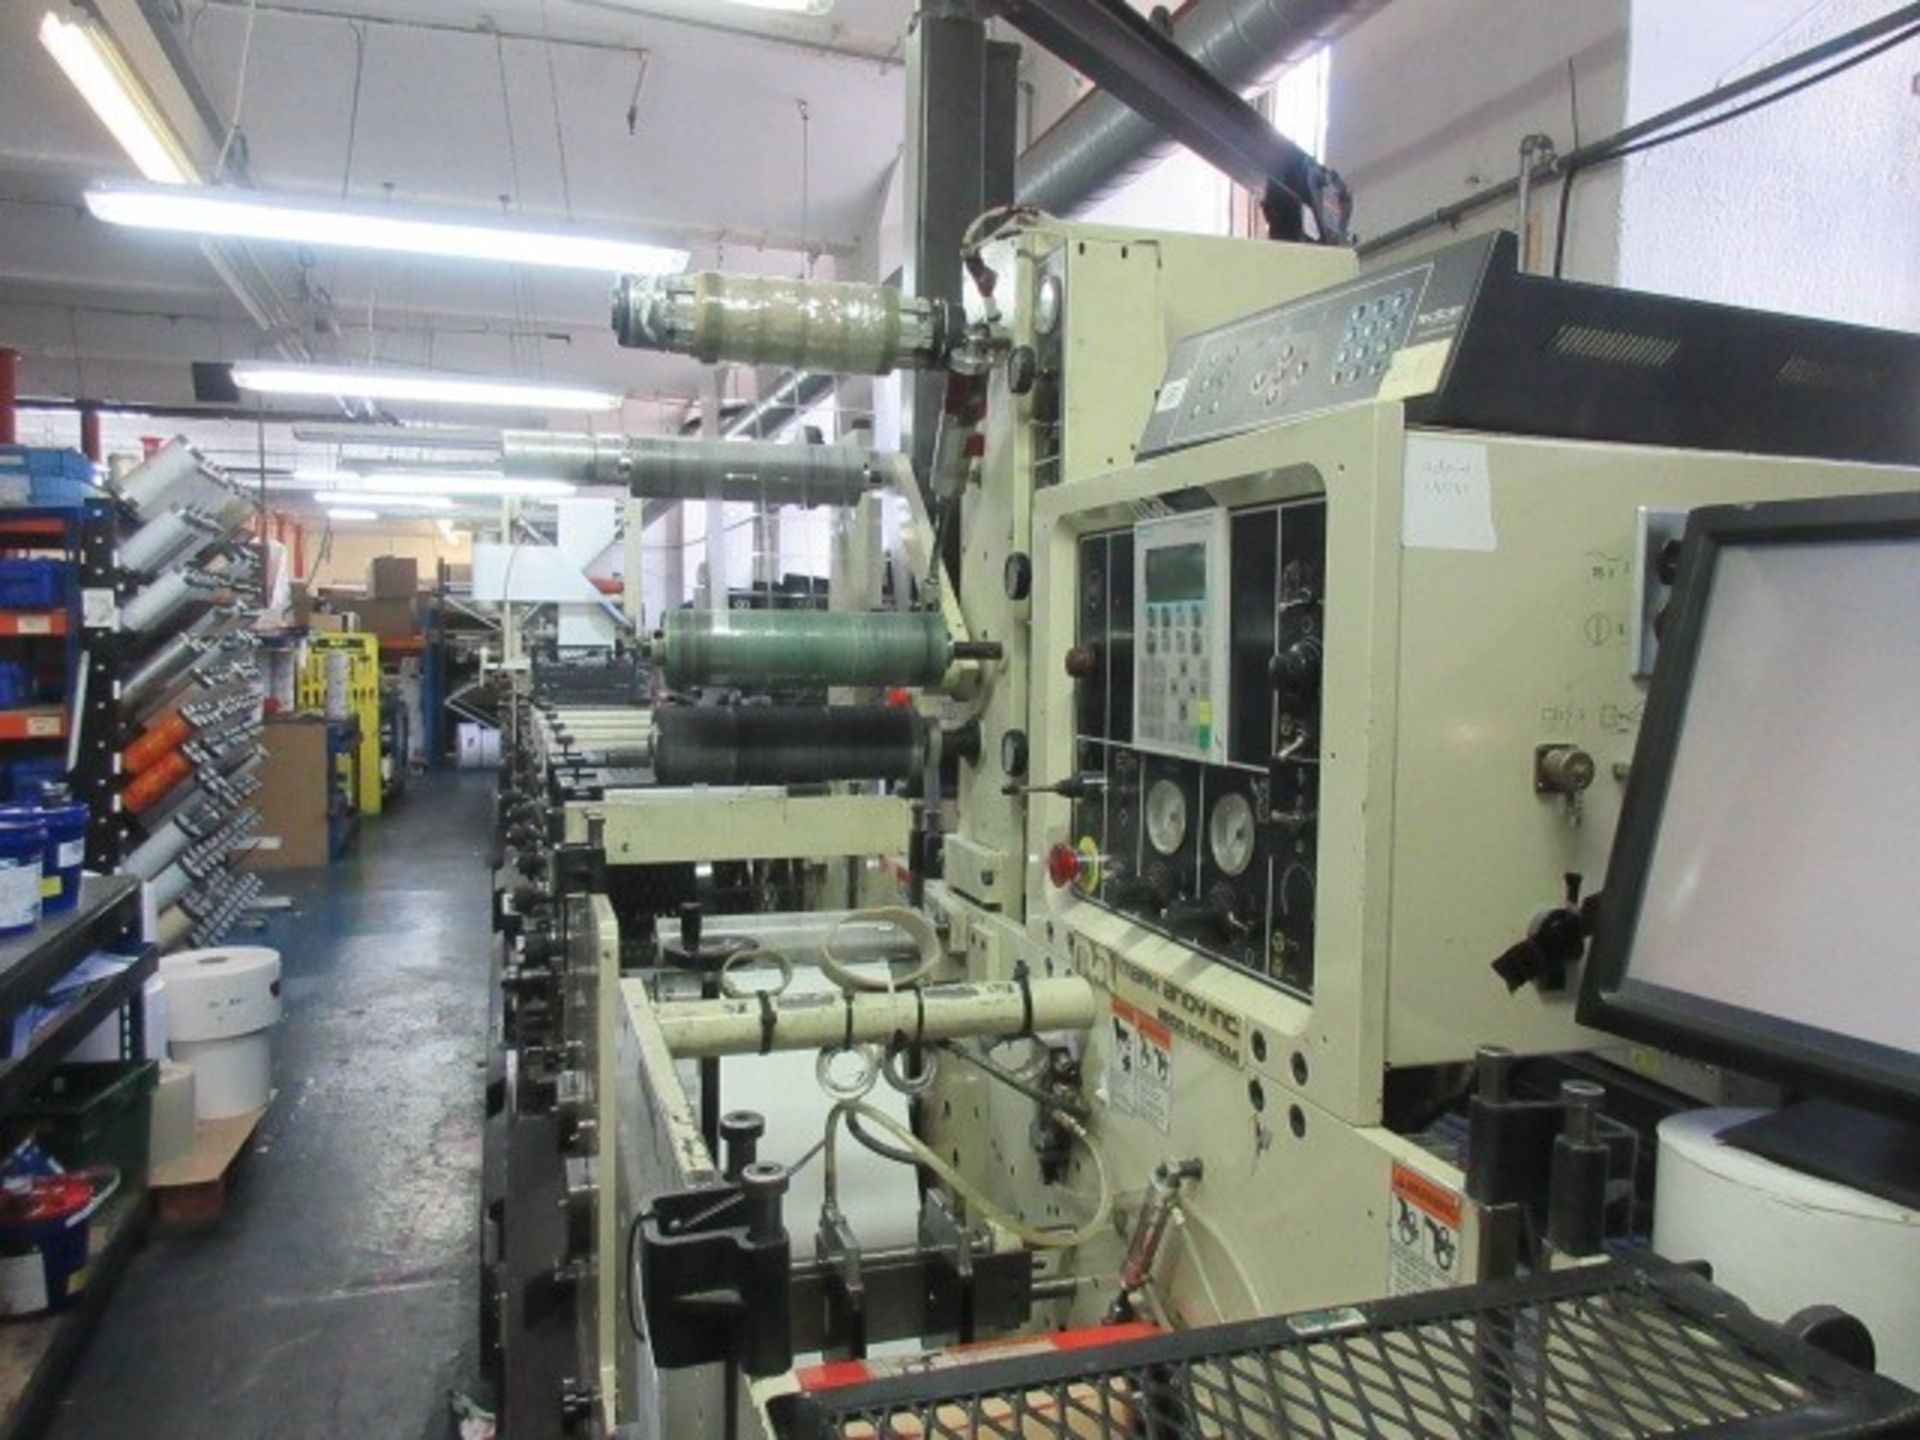 Mark Andy 2200-10F 10” 8 colour flexographic label printing press. Serial no: 1260086 (2002) - Image 152 of 383